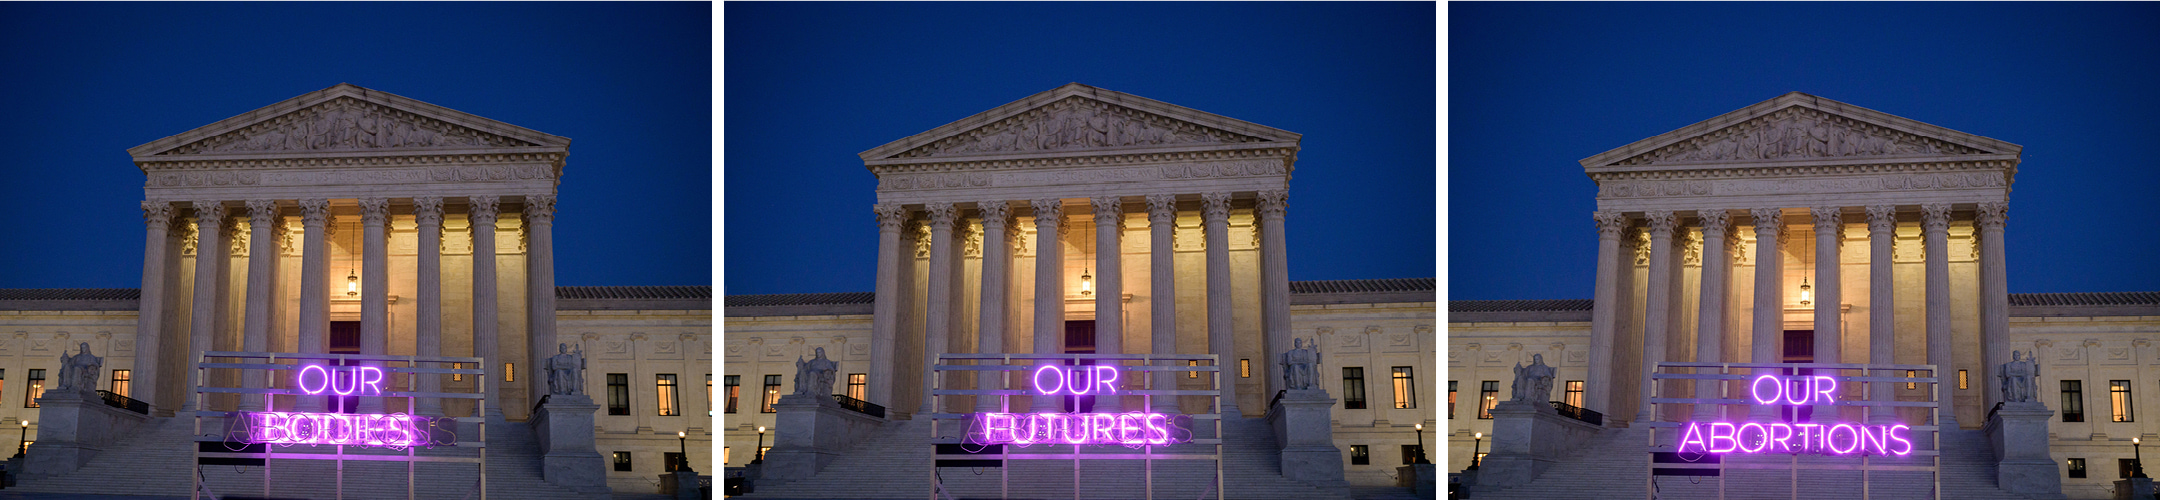 images of the neon sign with the U.S. Supreme Court Building in the background